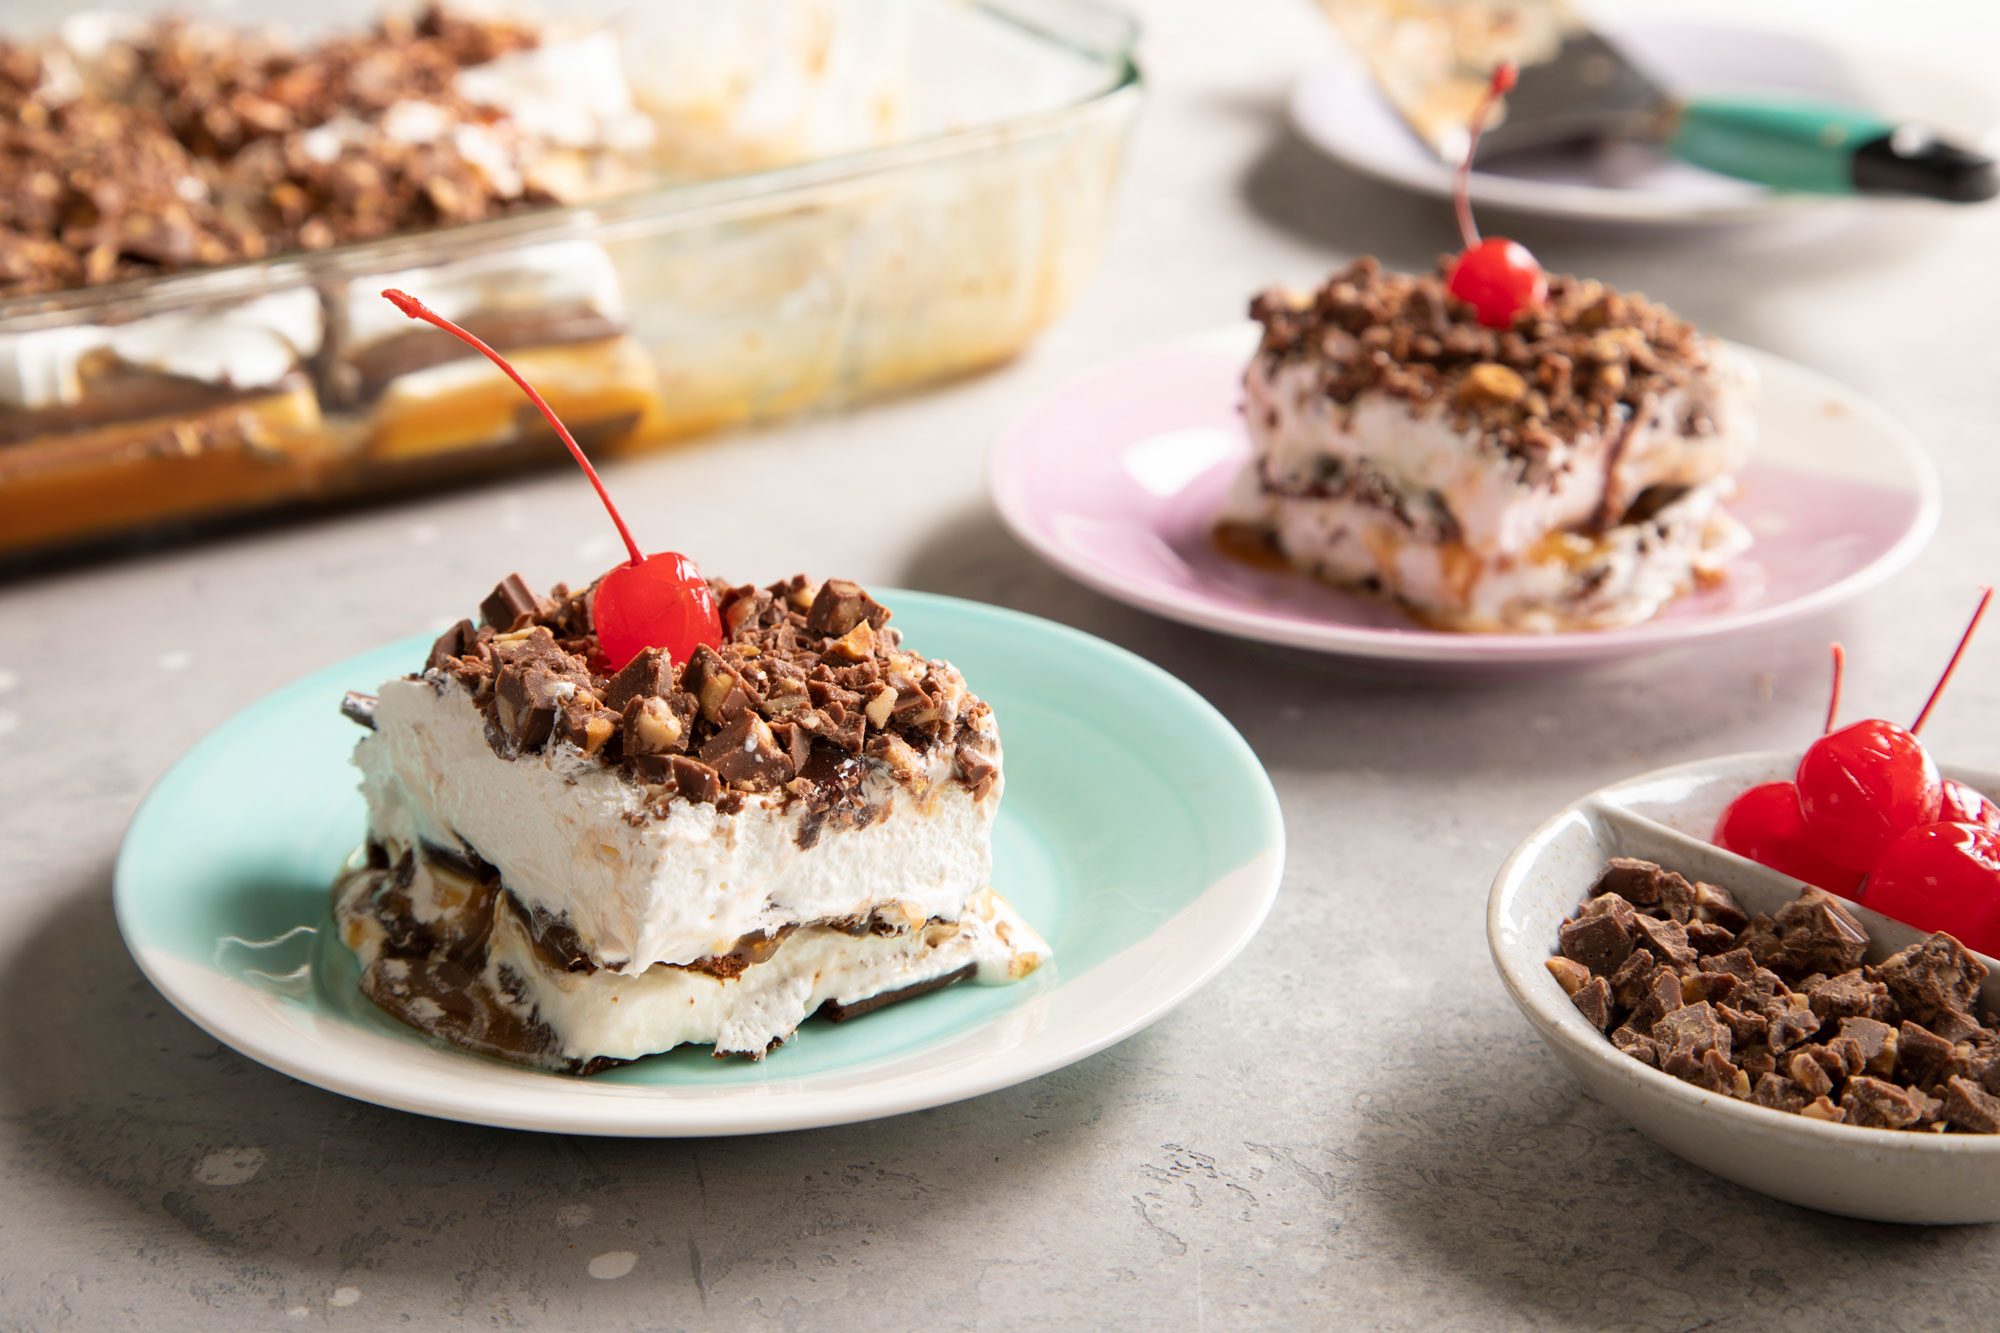 Ice Cream Sandwich cake with a cherry on top, served on plates